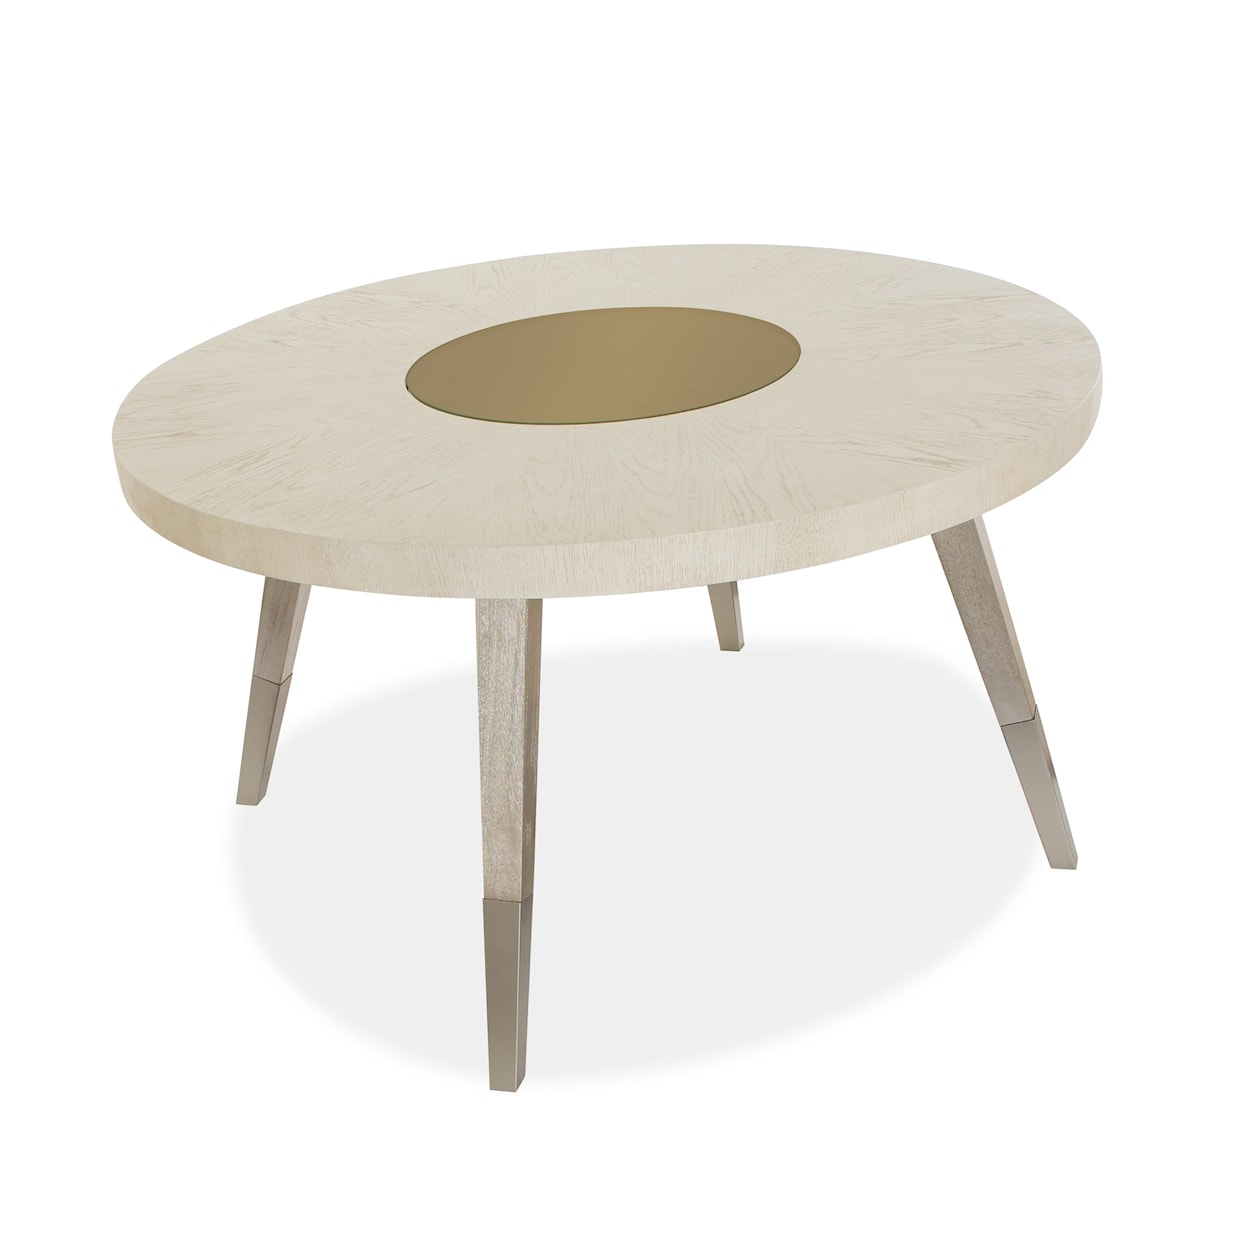 Magnussen Home Lenox Dining Round Dining Table